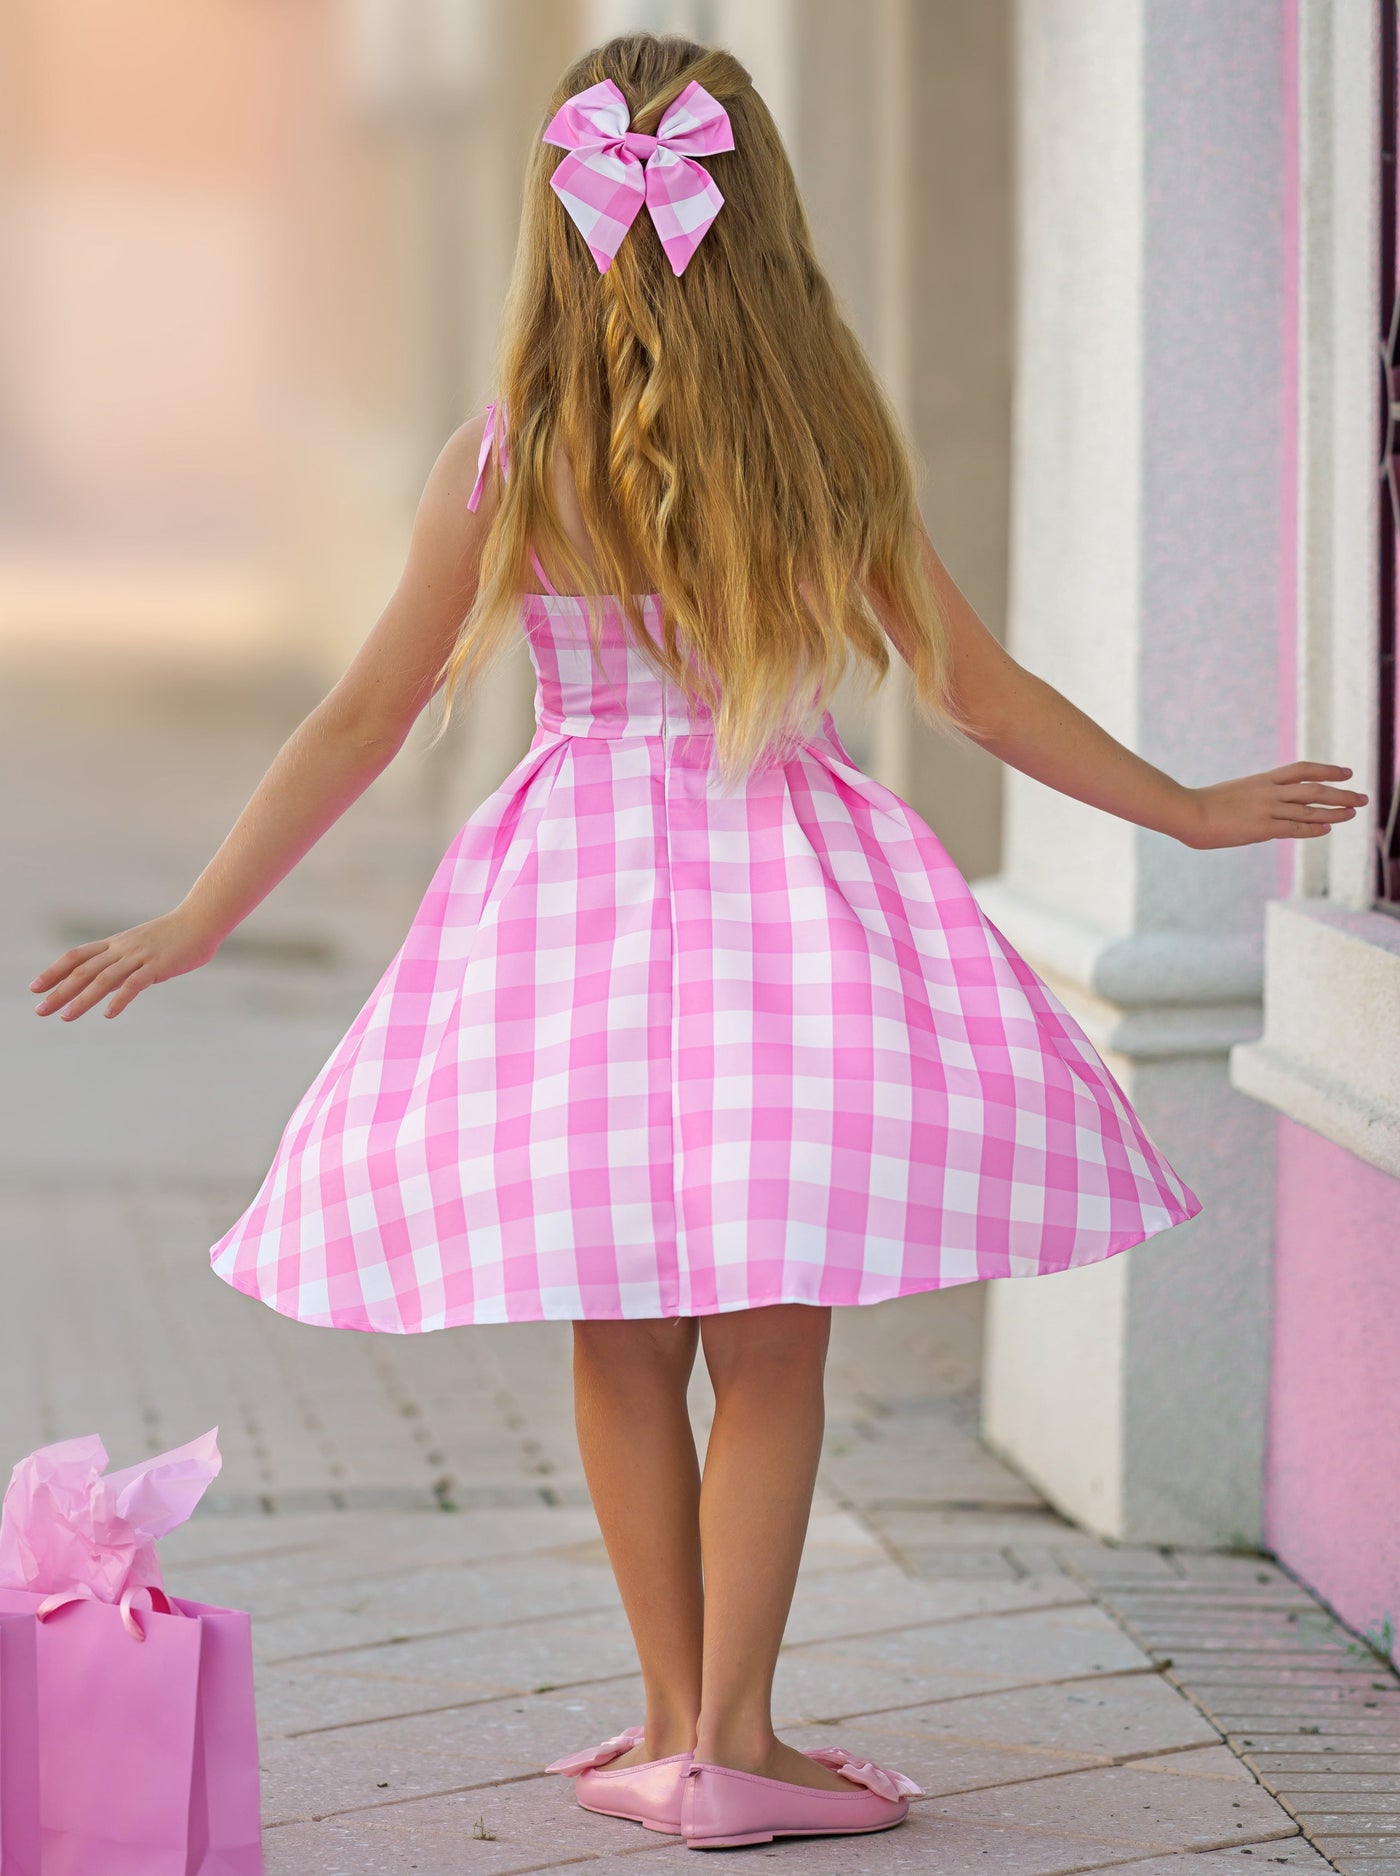 Mia Belle Mommy And Me Barbie Inspired Pink Gingham Dress Costumes